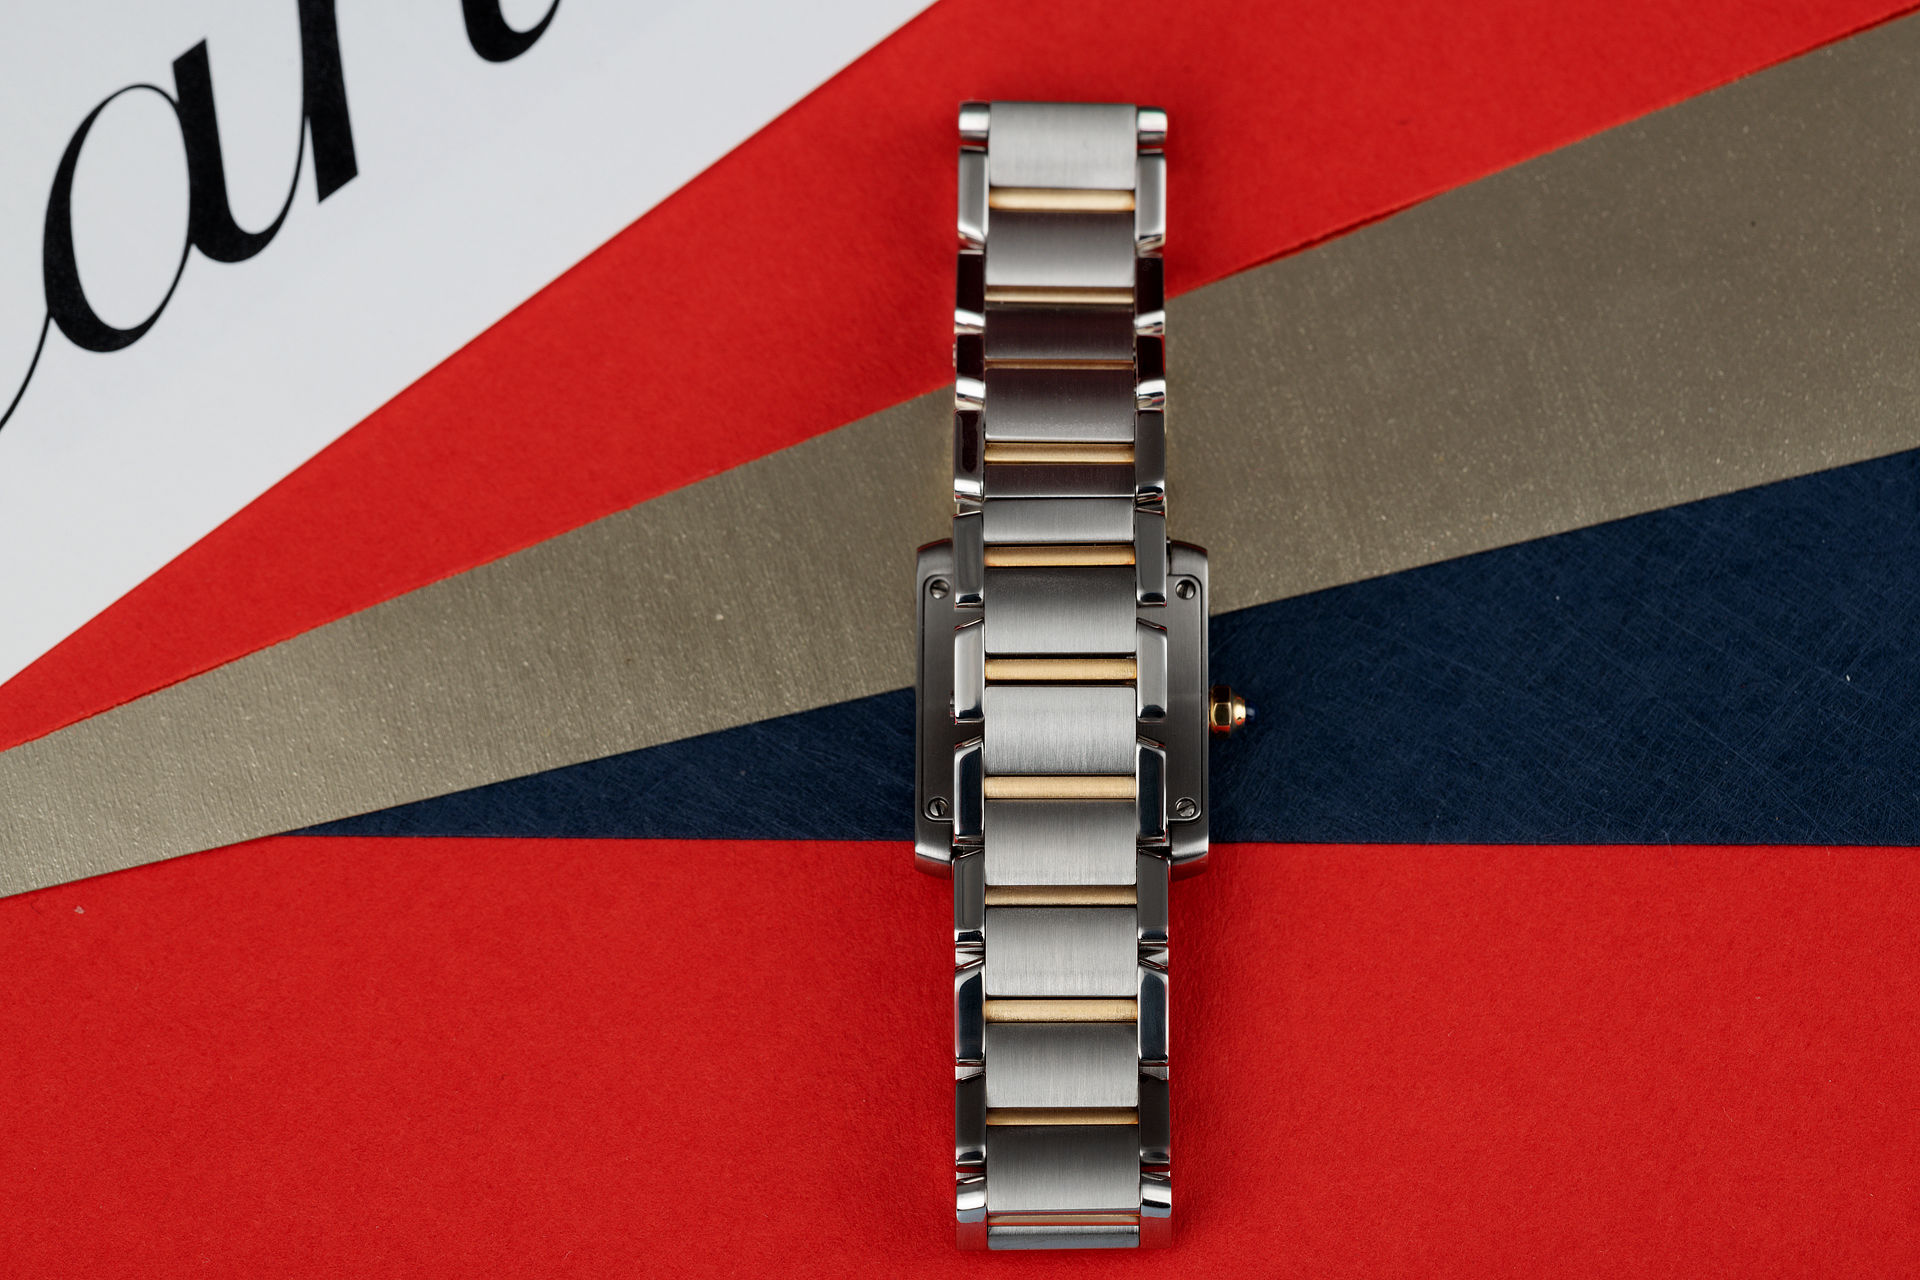 CARTIER, TANK FRANCAISE REF 2384, A LADY'S STAINLESS STEEL WRISTWATCH WITH  BRACELET CIRCA 2005, Class of 2019: Watches, Jewels, Pens & Accessories, Watches